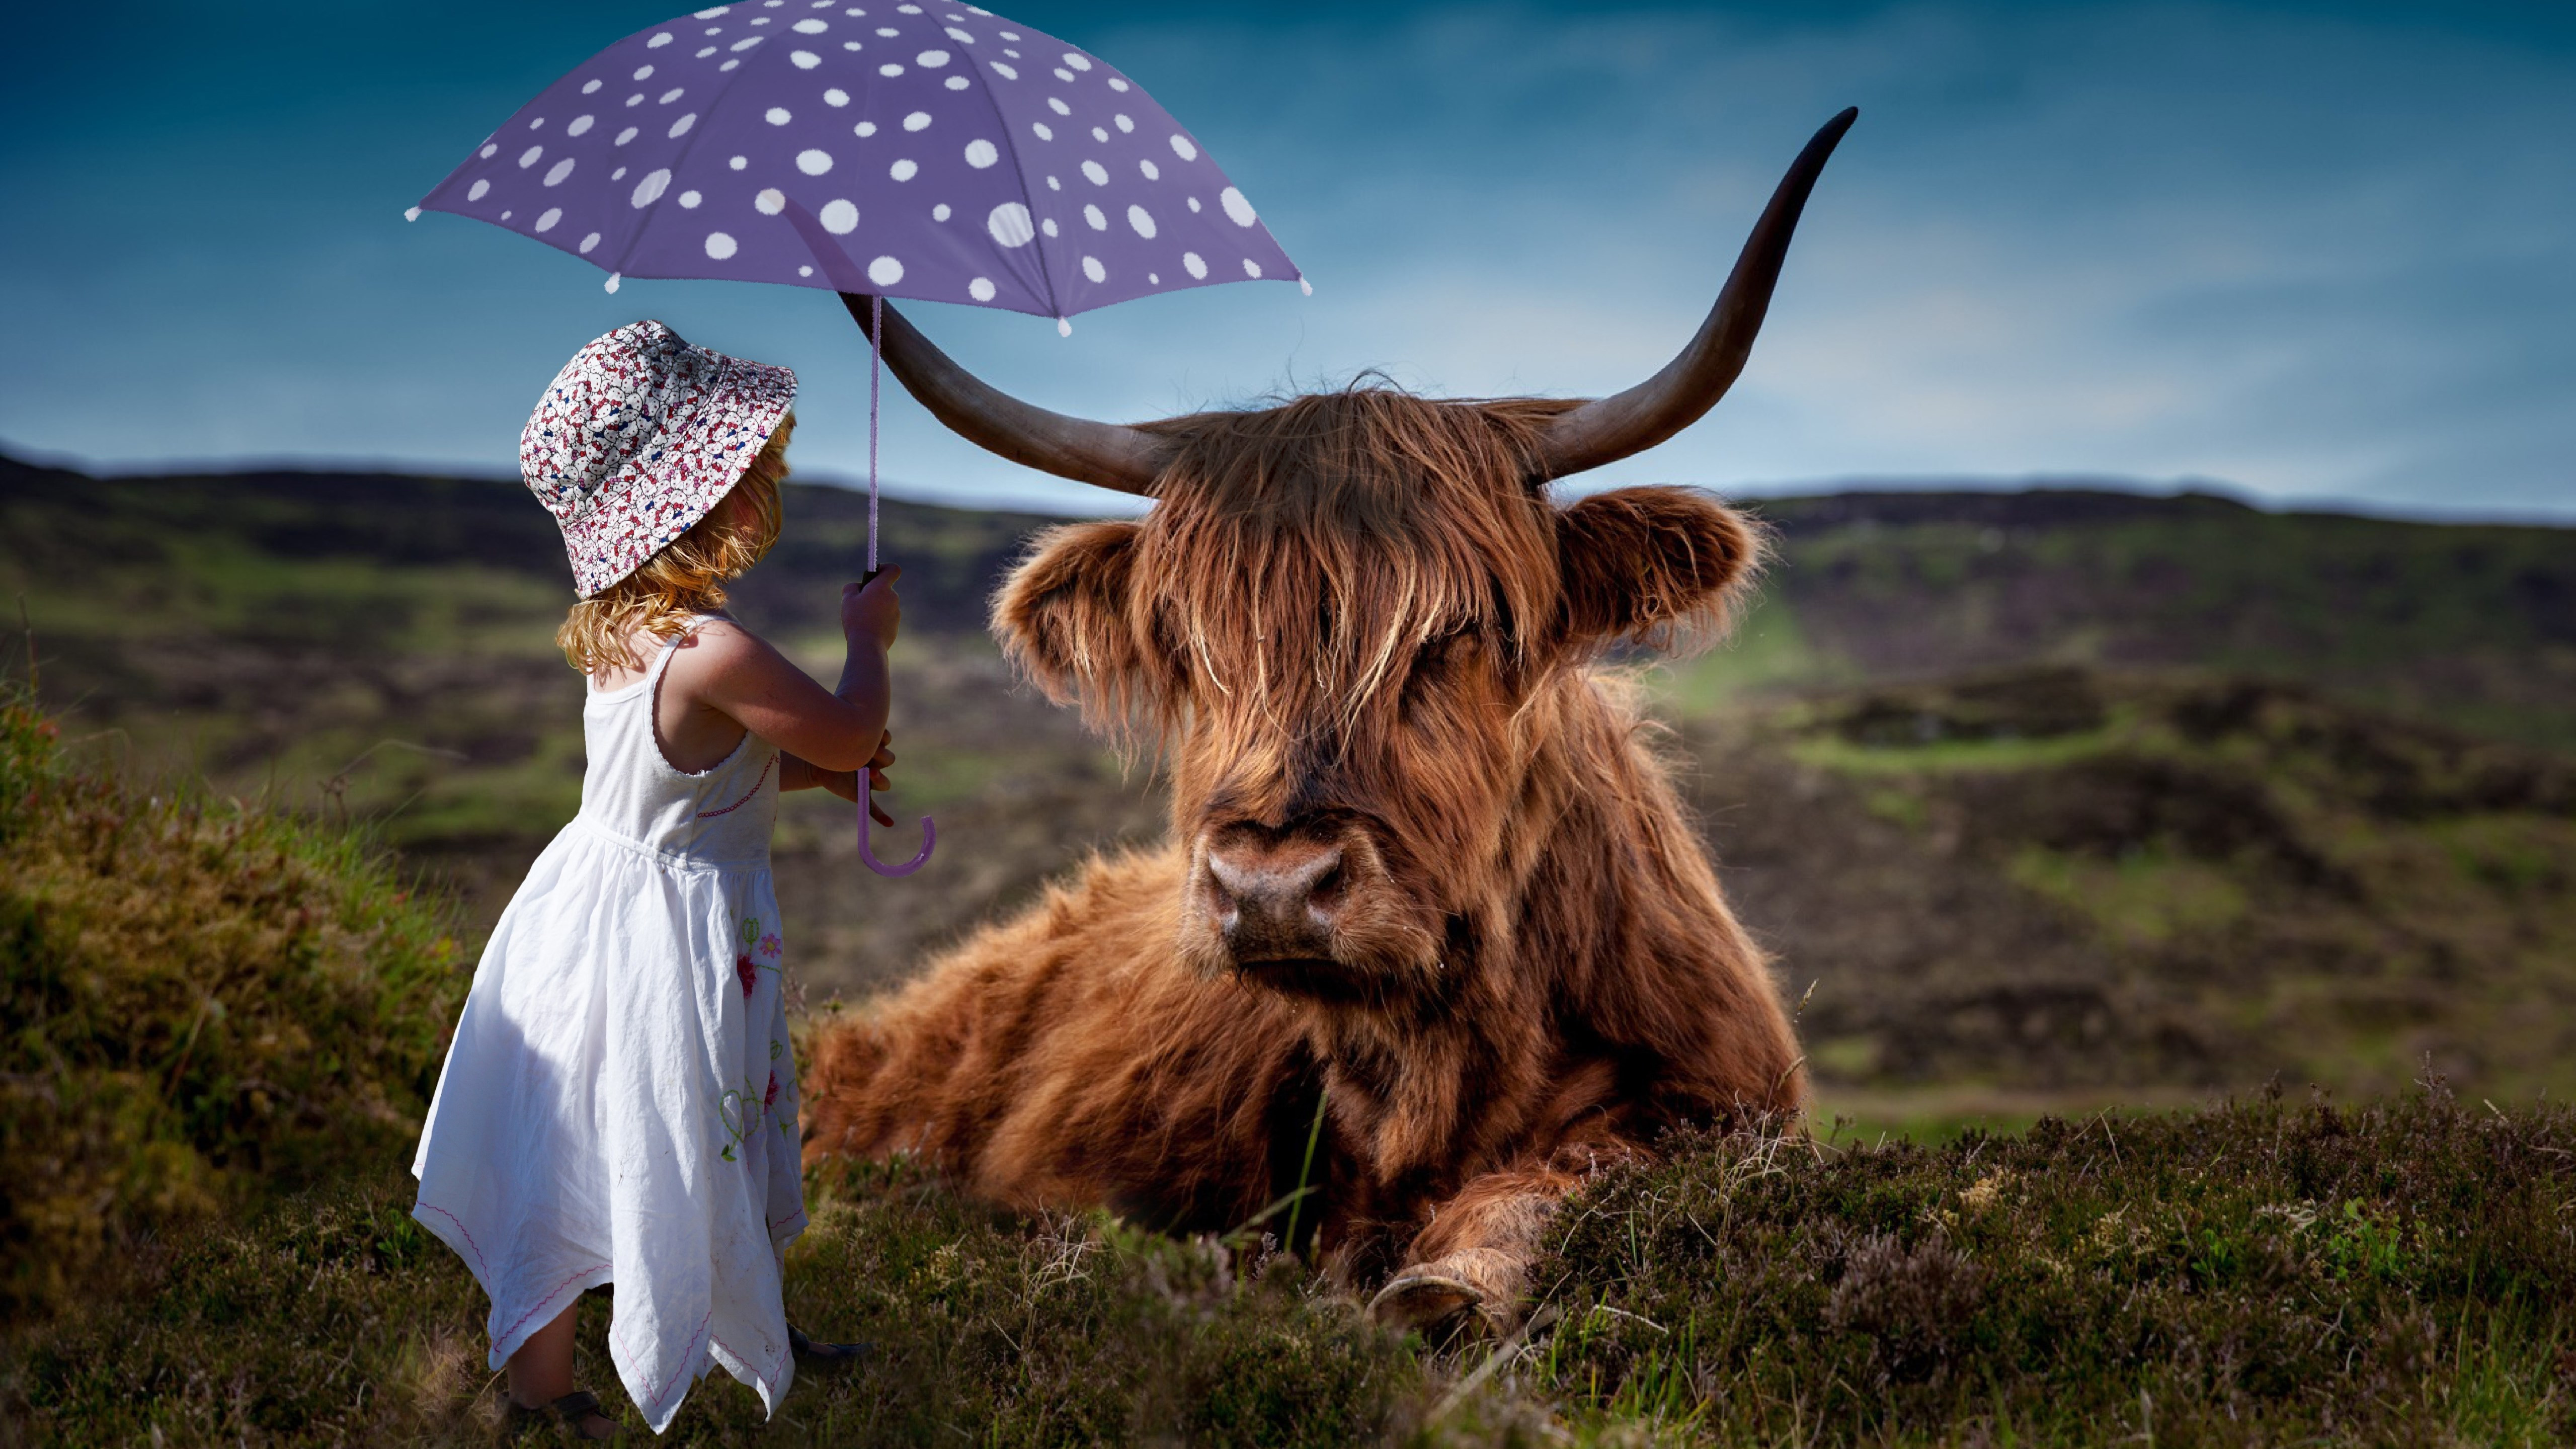 Child with the umbrella and the funny cow wallpaper 5120x2880